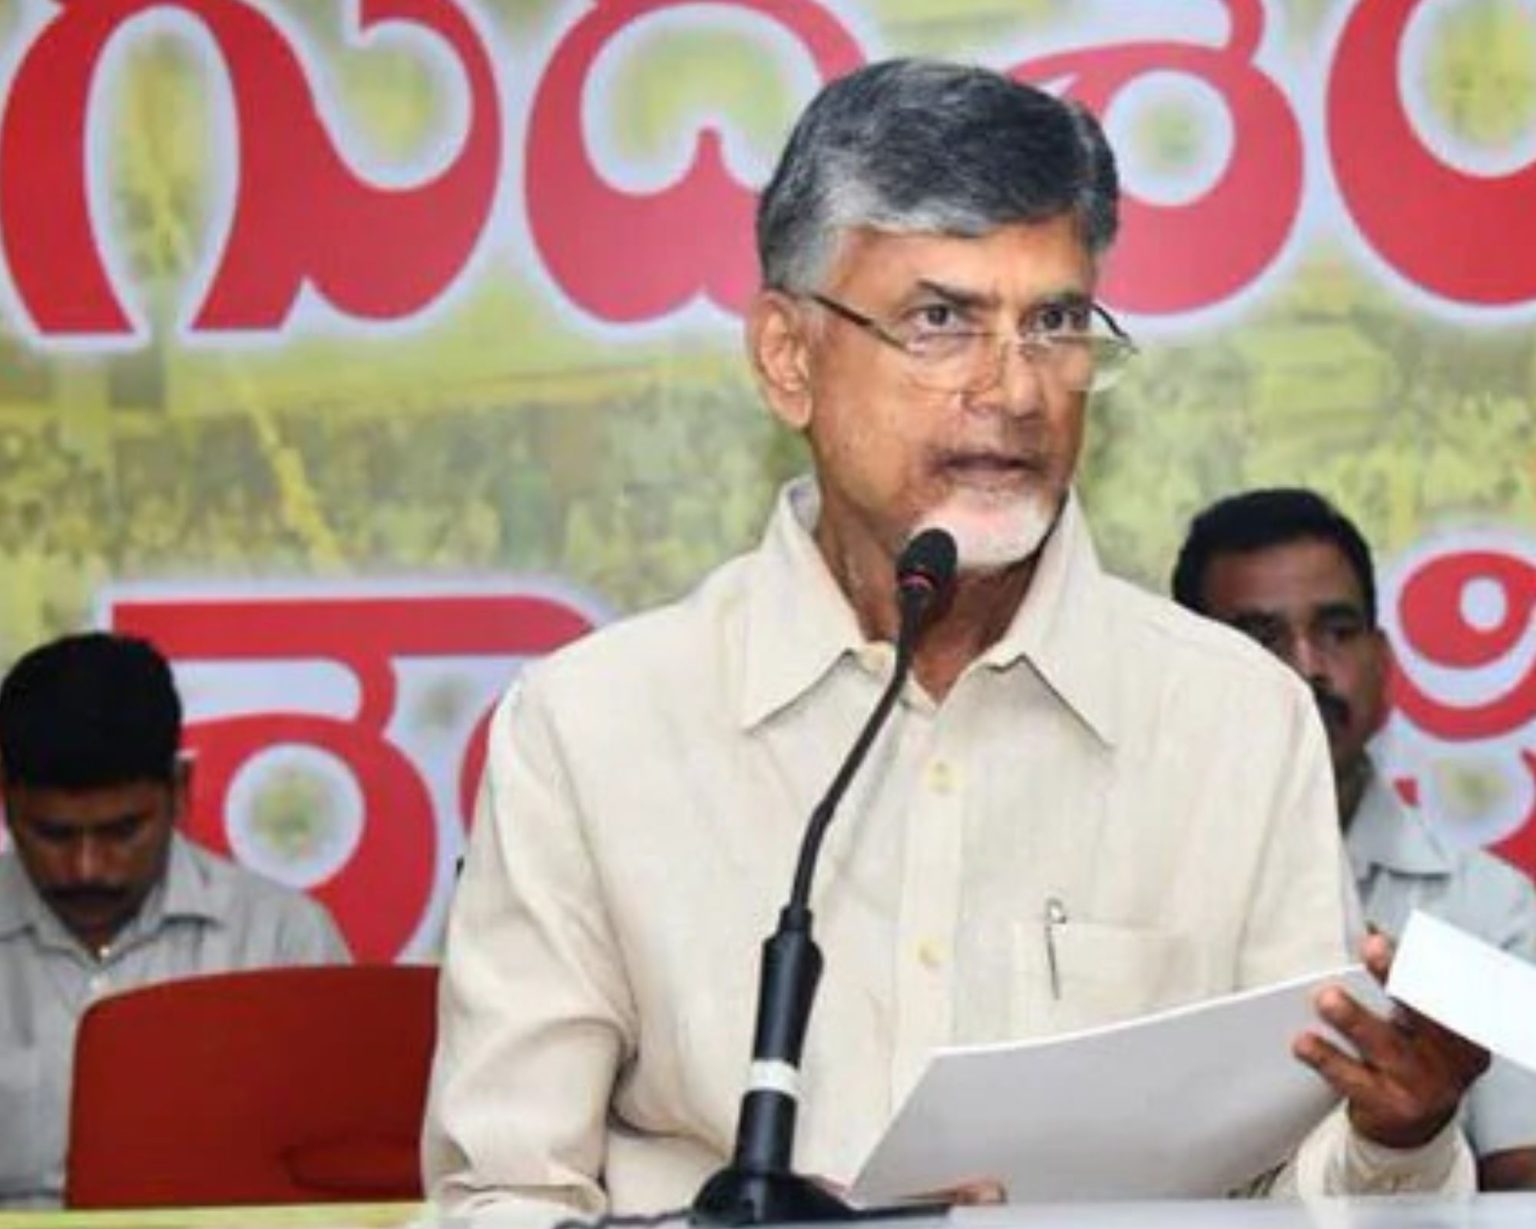 Chandrababu Naidu says that his role in national politics is quite clear